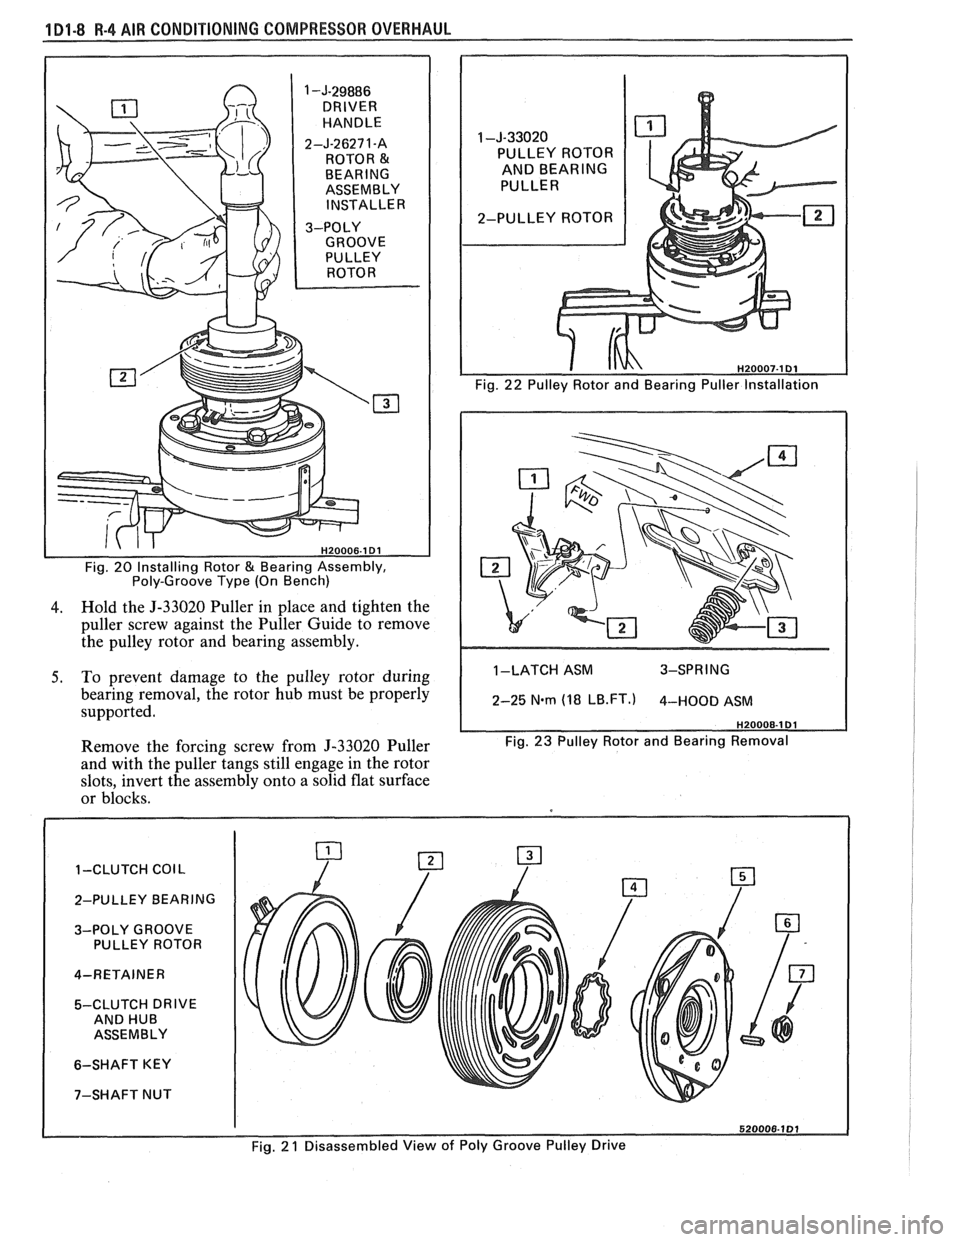 PONTIAC FIERO 1988  Service Repair Manual 
1 -J-29886 DRIVER 
HANDLE 
2-J-26271-A  ROTOR 
& BEARING 
ASSEMBLY 
INSTALLER 
Fig.  20 Installing  Rotor 
& Bearing Assembly, 
Poly-Groove  Type (On Bench) 
4. Hold  the J-33020  Puller in  place  a